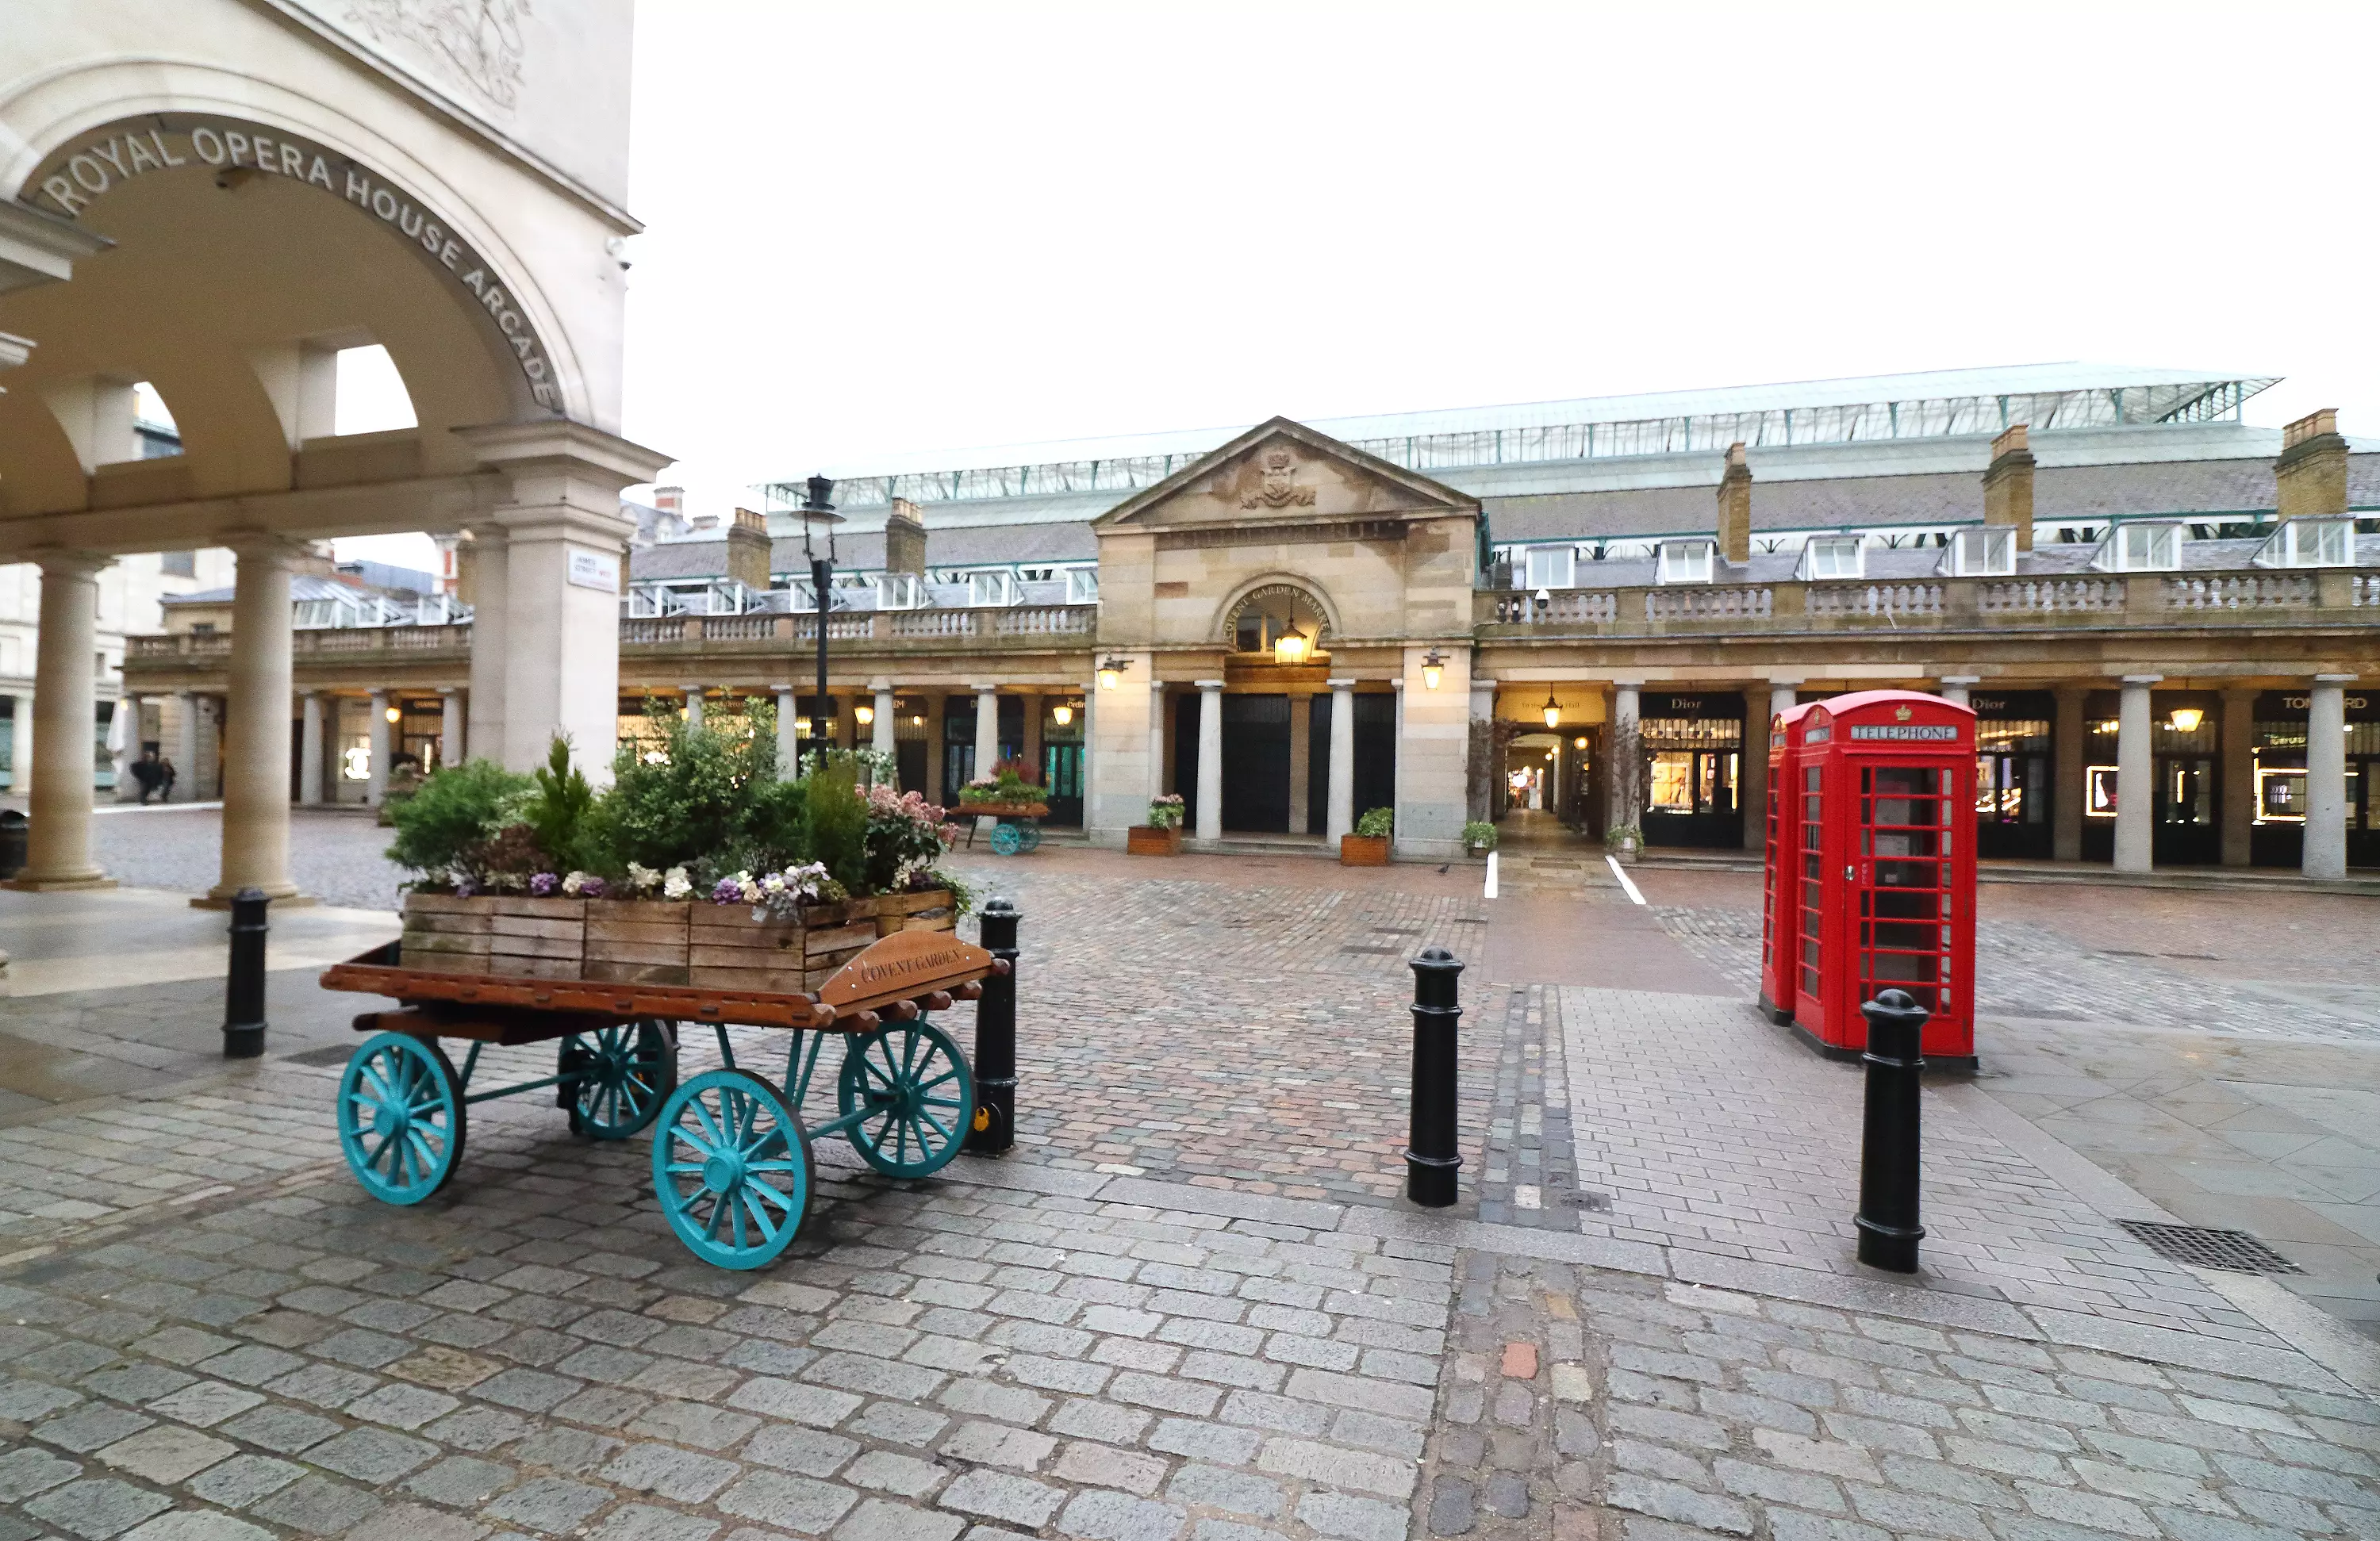 Covent Garden market in London is currently deserted, showing that some are taking social distancing seriously.